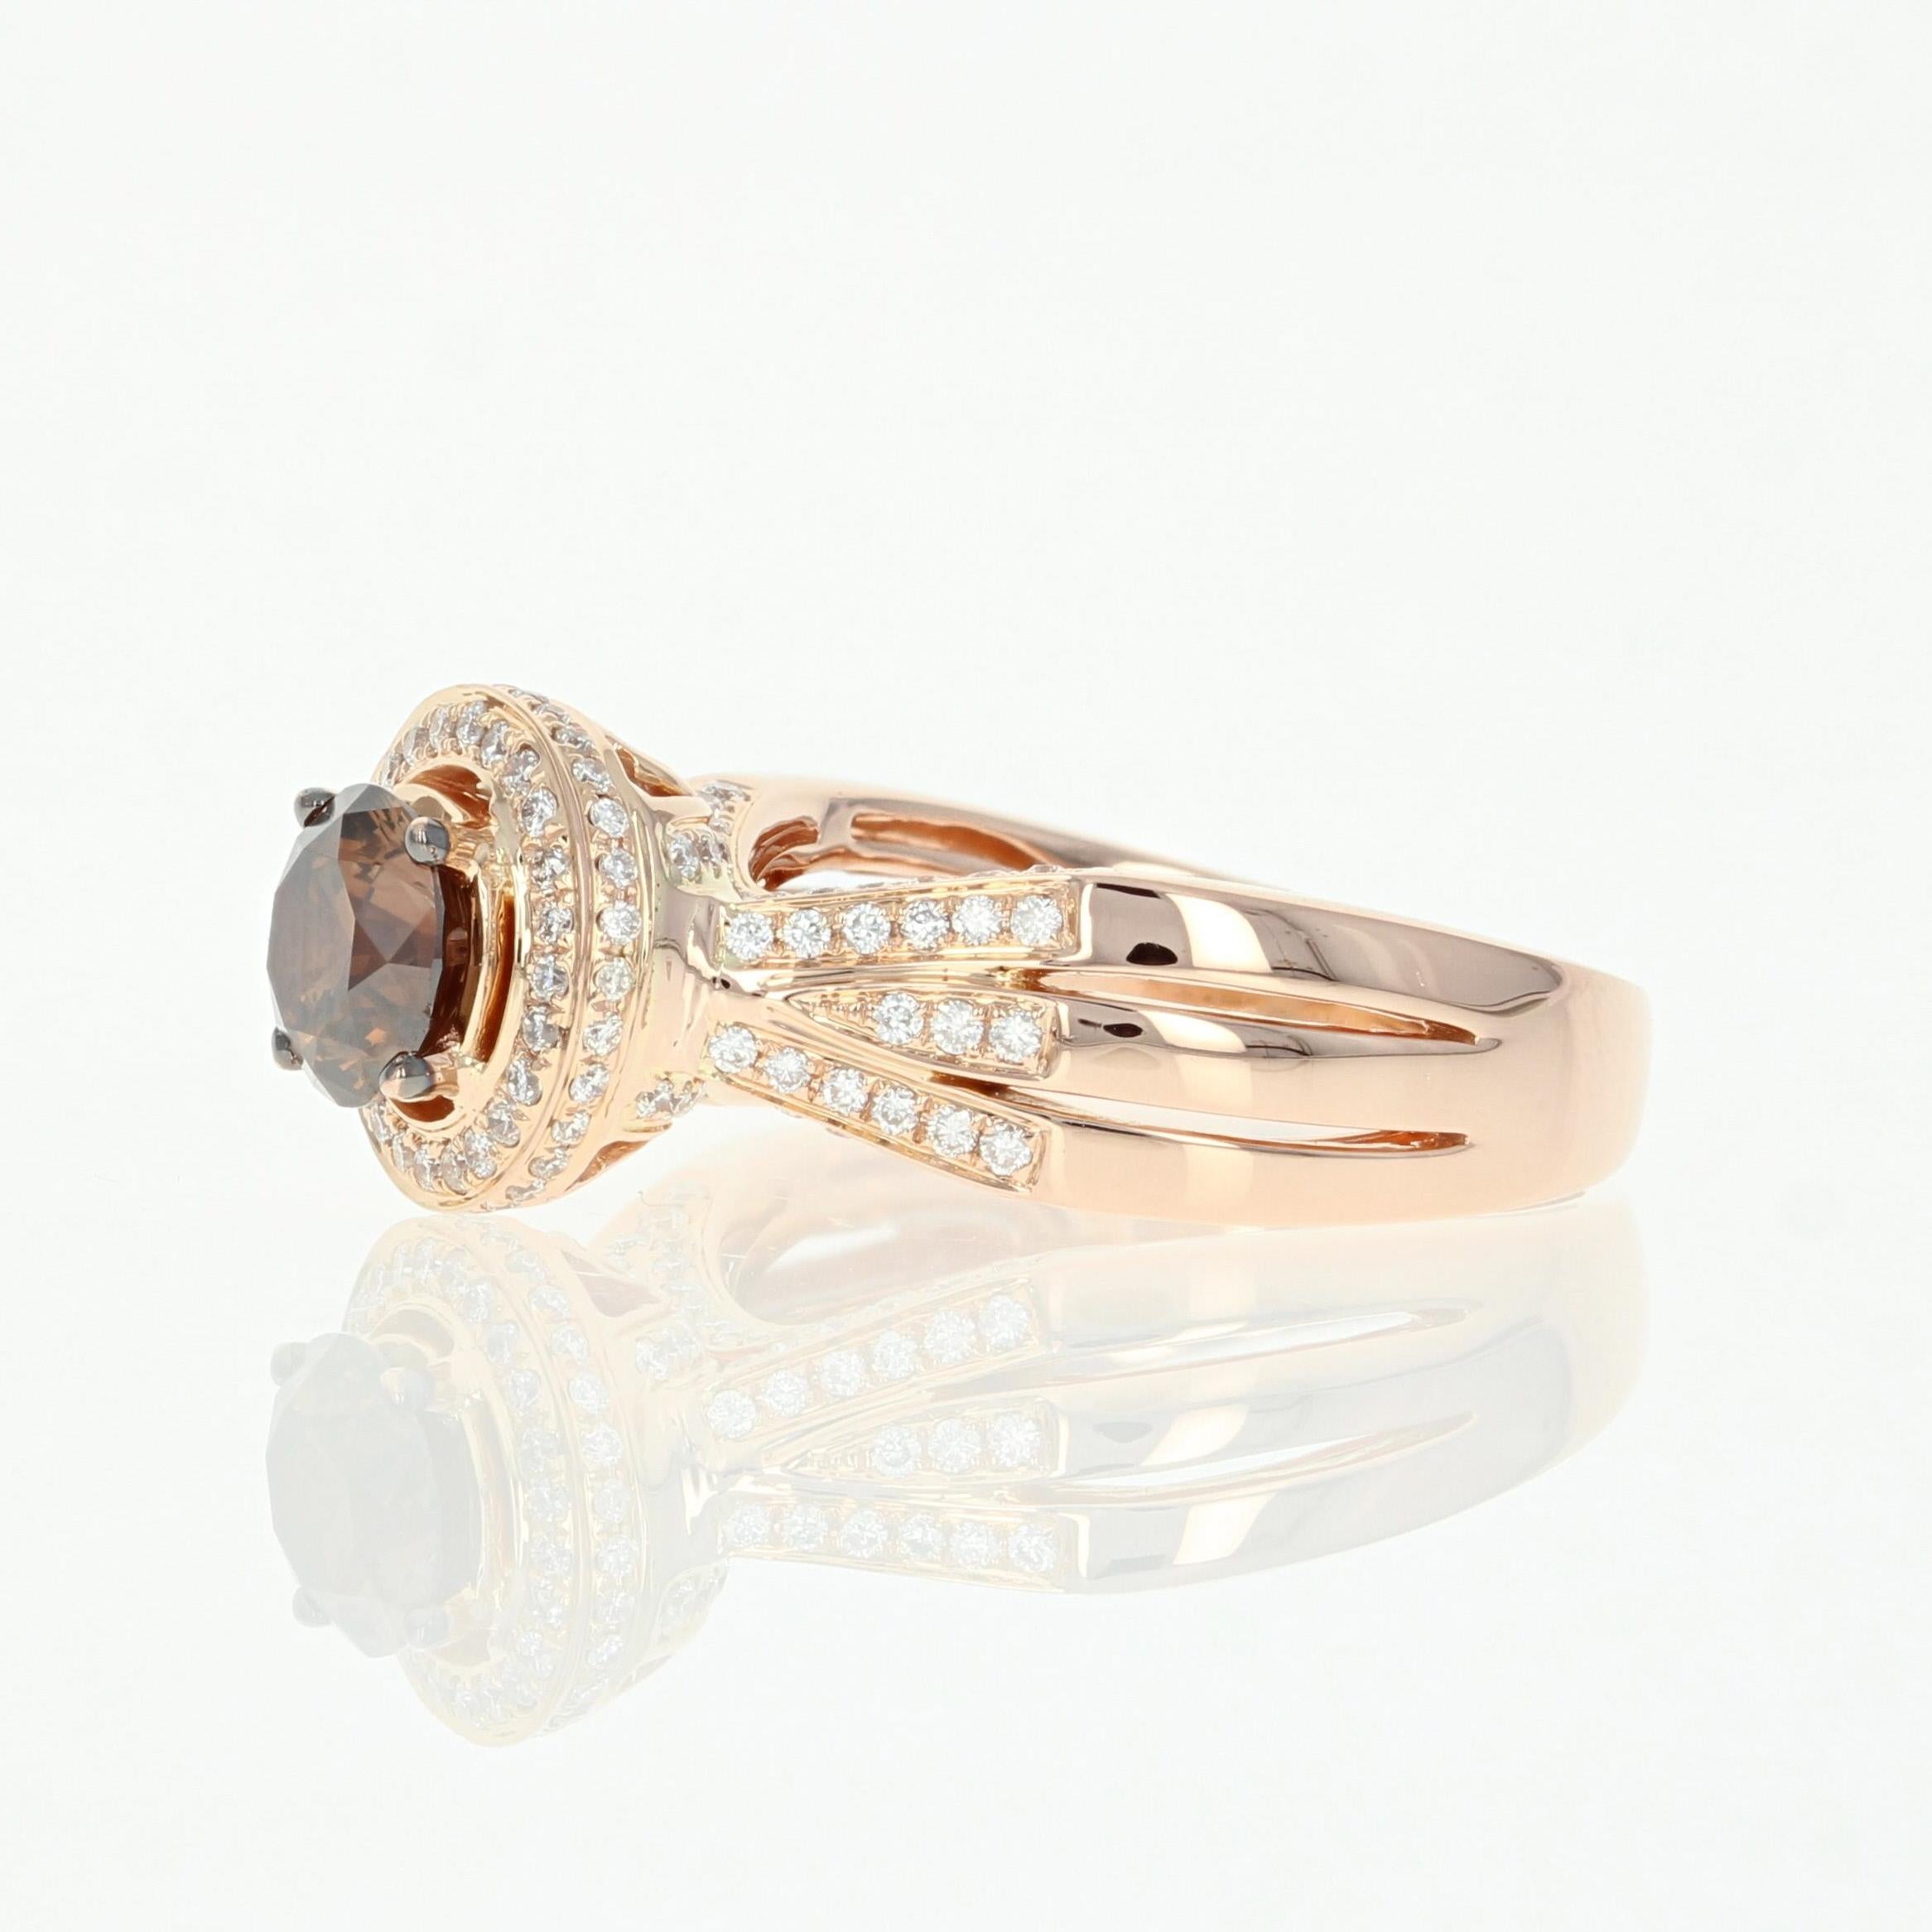 Treat yourself to the well-deserved gift of Le Vian jewelry! Crafted in 18k rose gold, this designer ring showcases a decadent chocolate brown diamond solitaire encircled by a shimmering white diamond halo. Even more radiant diamond accents grace